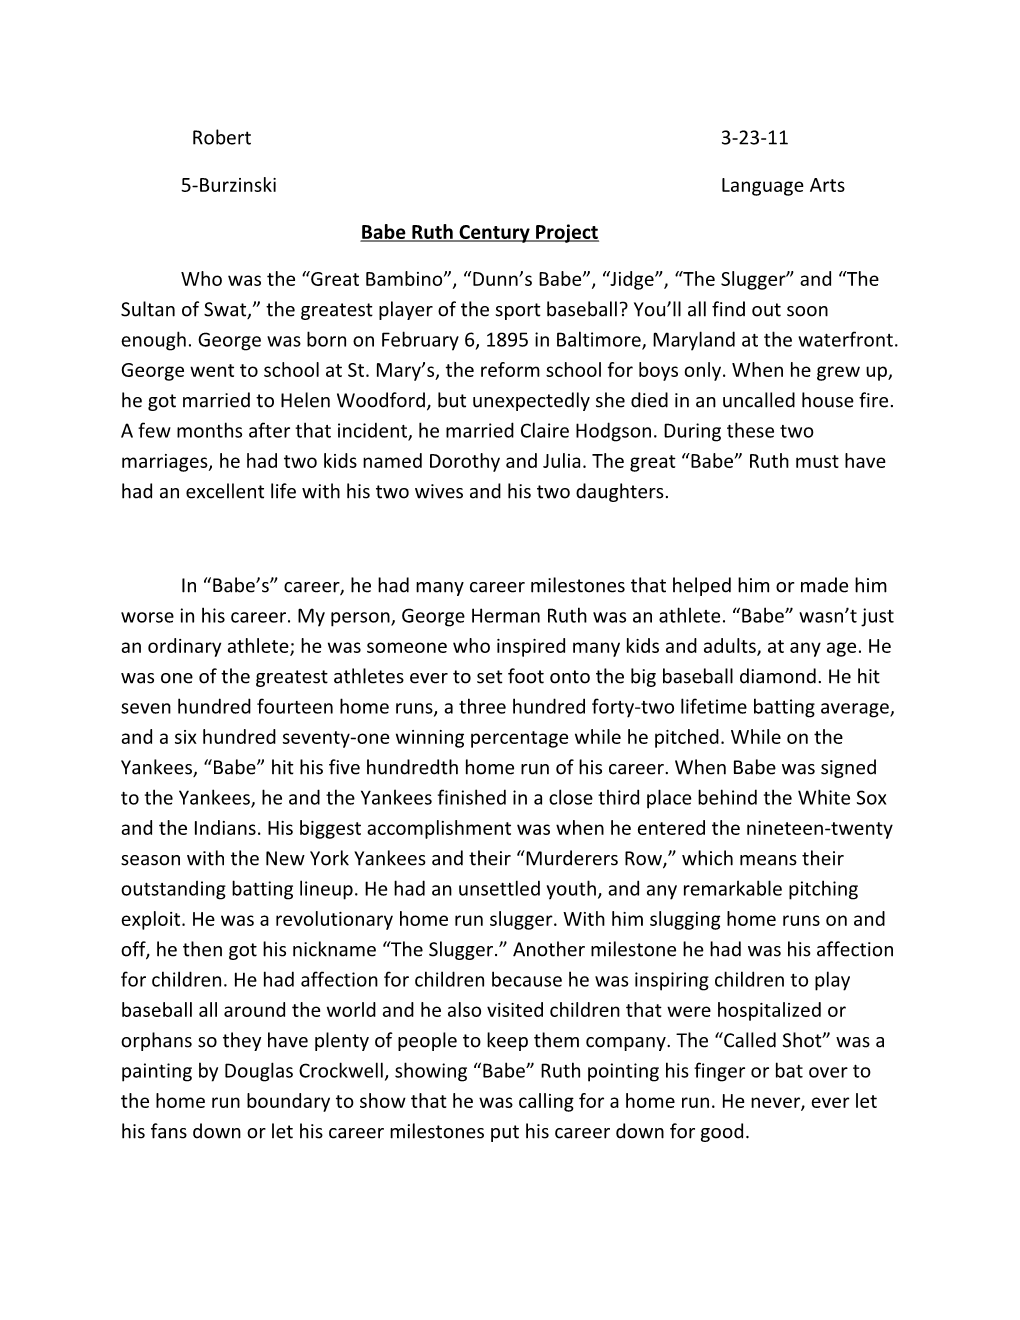 Babe Ruth Century Project